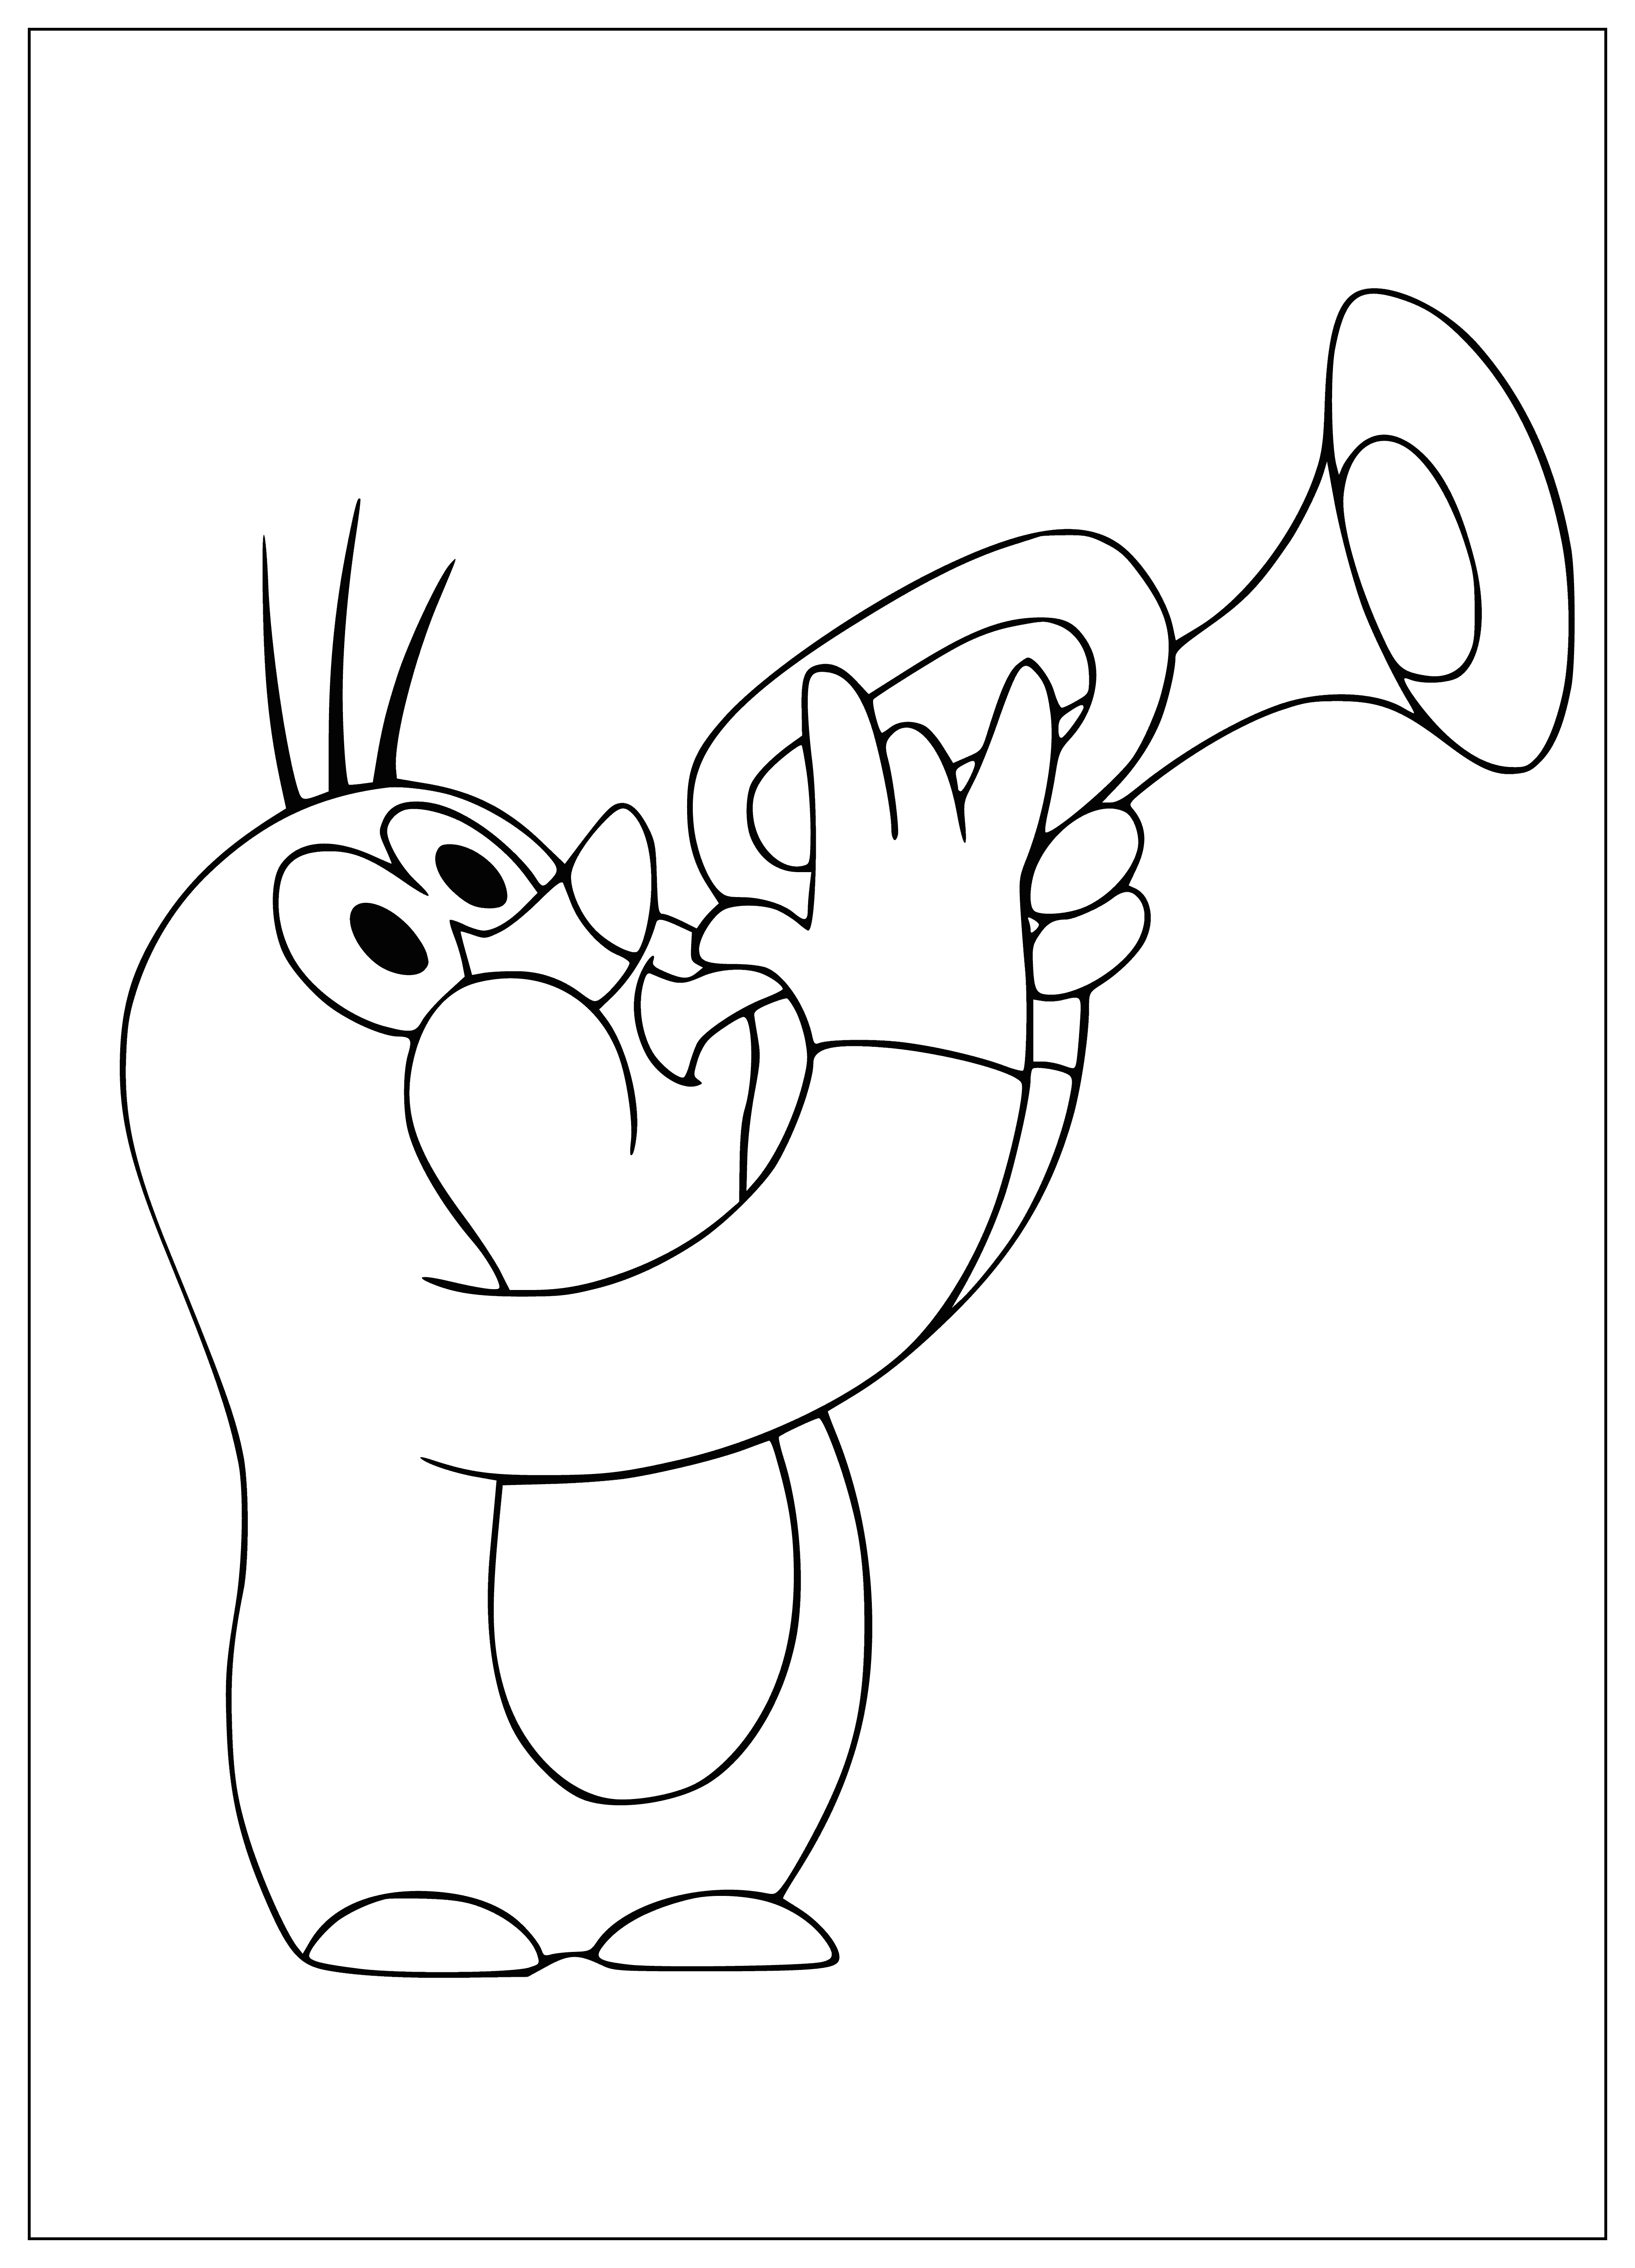 Mole and Trumpet coloring page